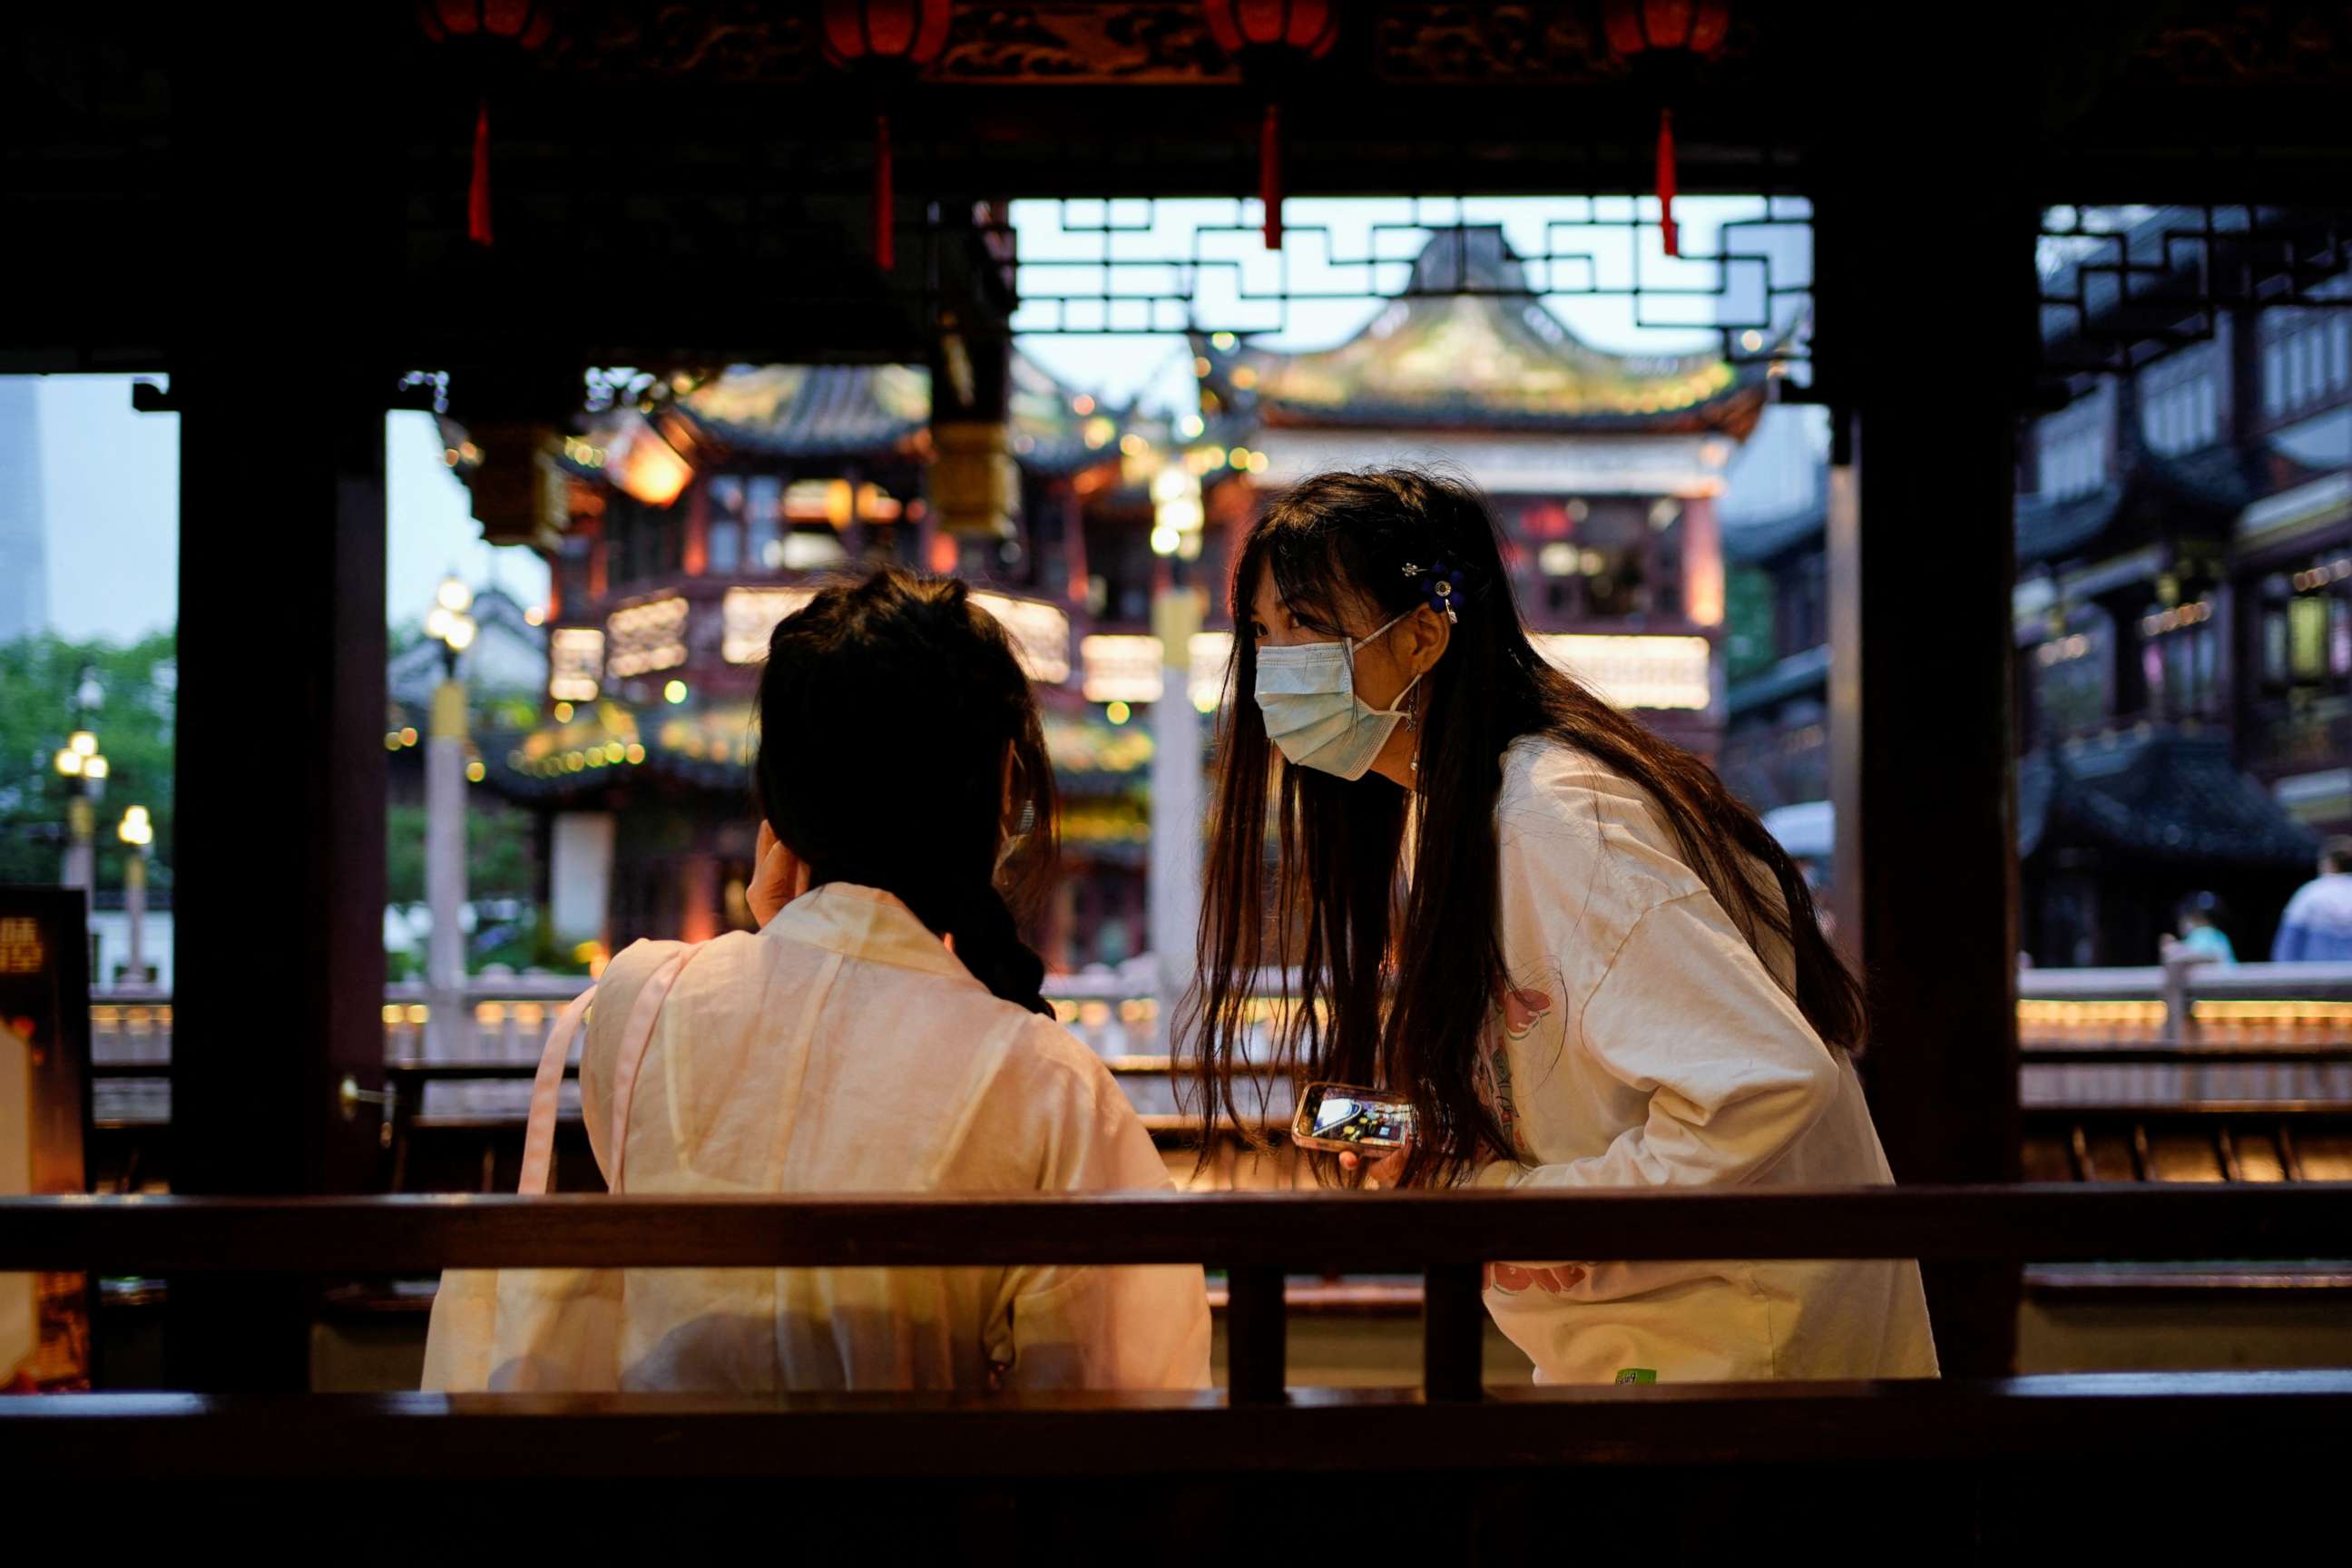 PHOTO: People wearing protective face masks chat in Yu Garden, amid new lockdown measures in parts of the city to curb the coronavirus disease outbreak in Shanghai, China. June 10, 2022.